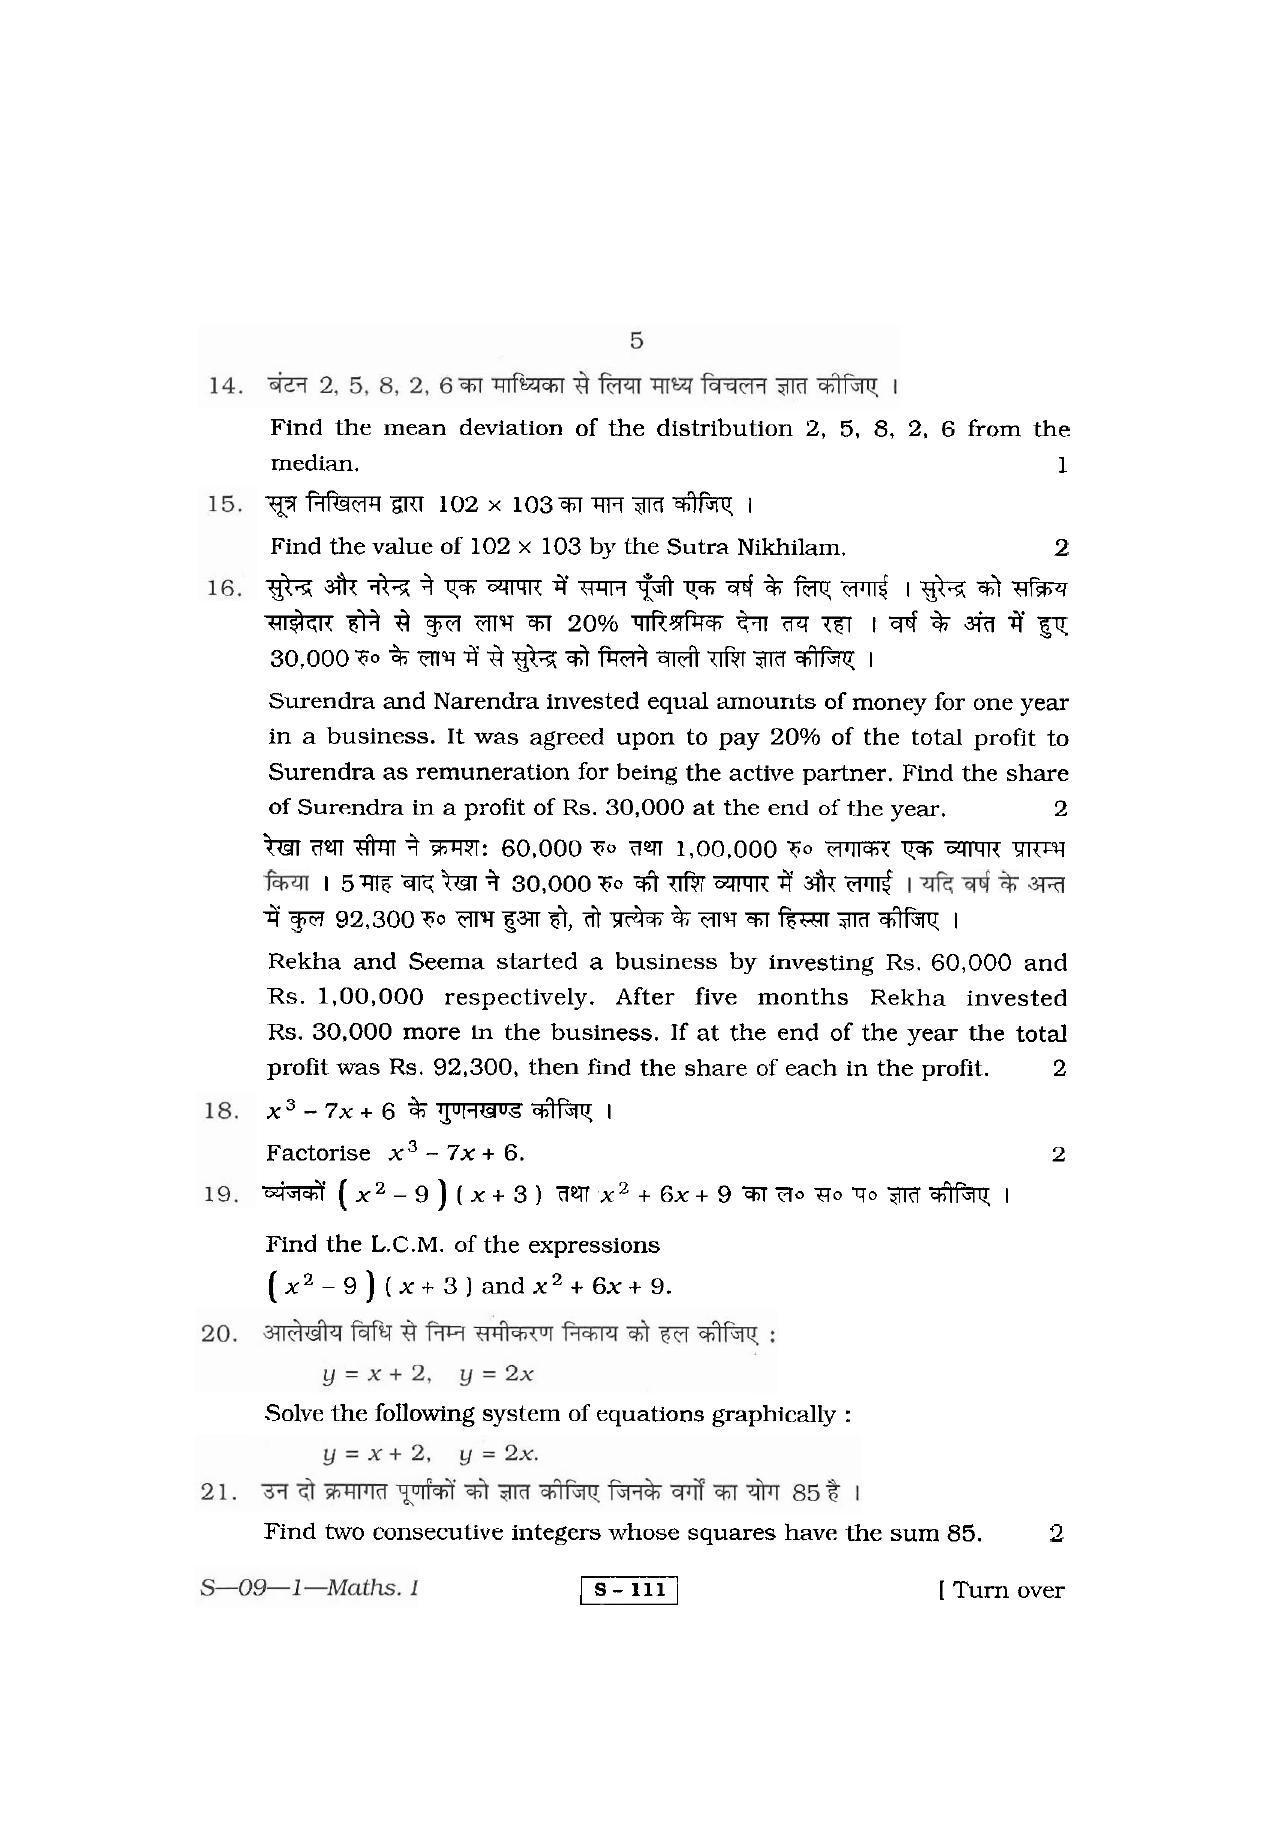 RBSE Class 10 Mathematics  – I 2011 Question Paper - Page 5